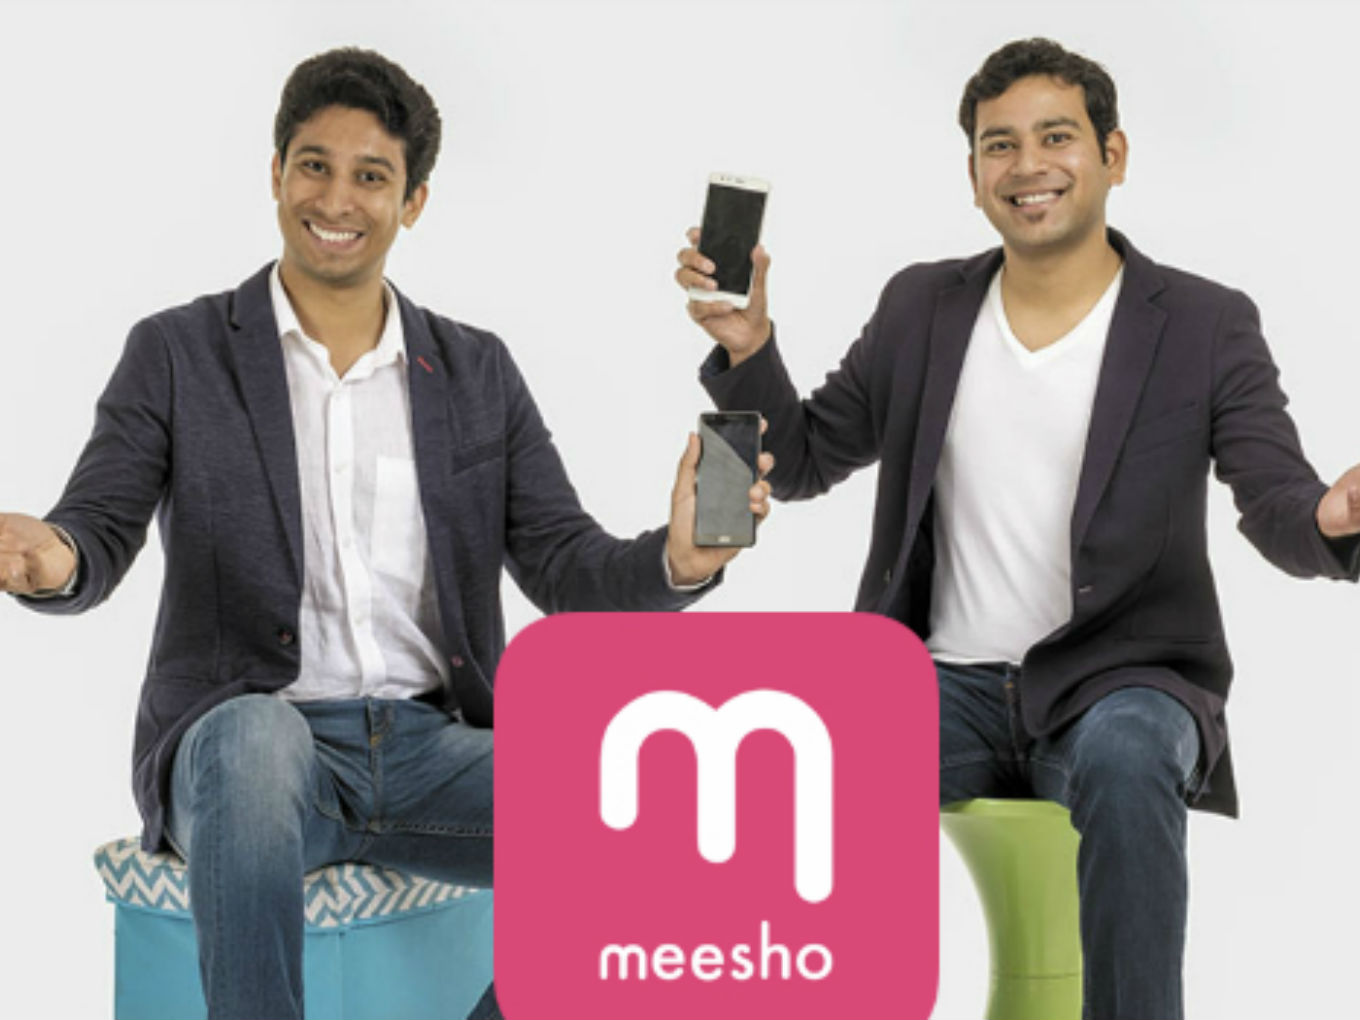 Social Commerce Startup Meesho To Raise Funds From Fidelity, Others